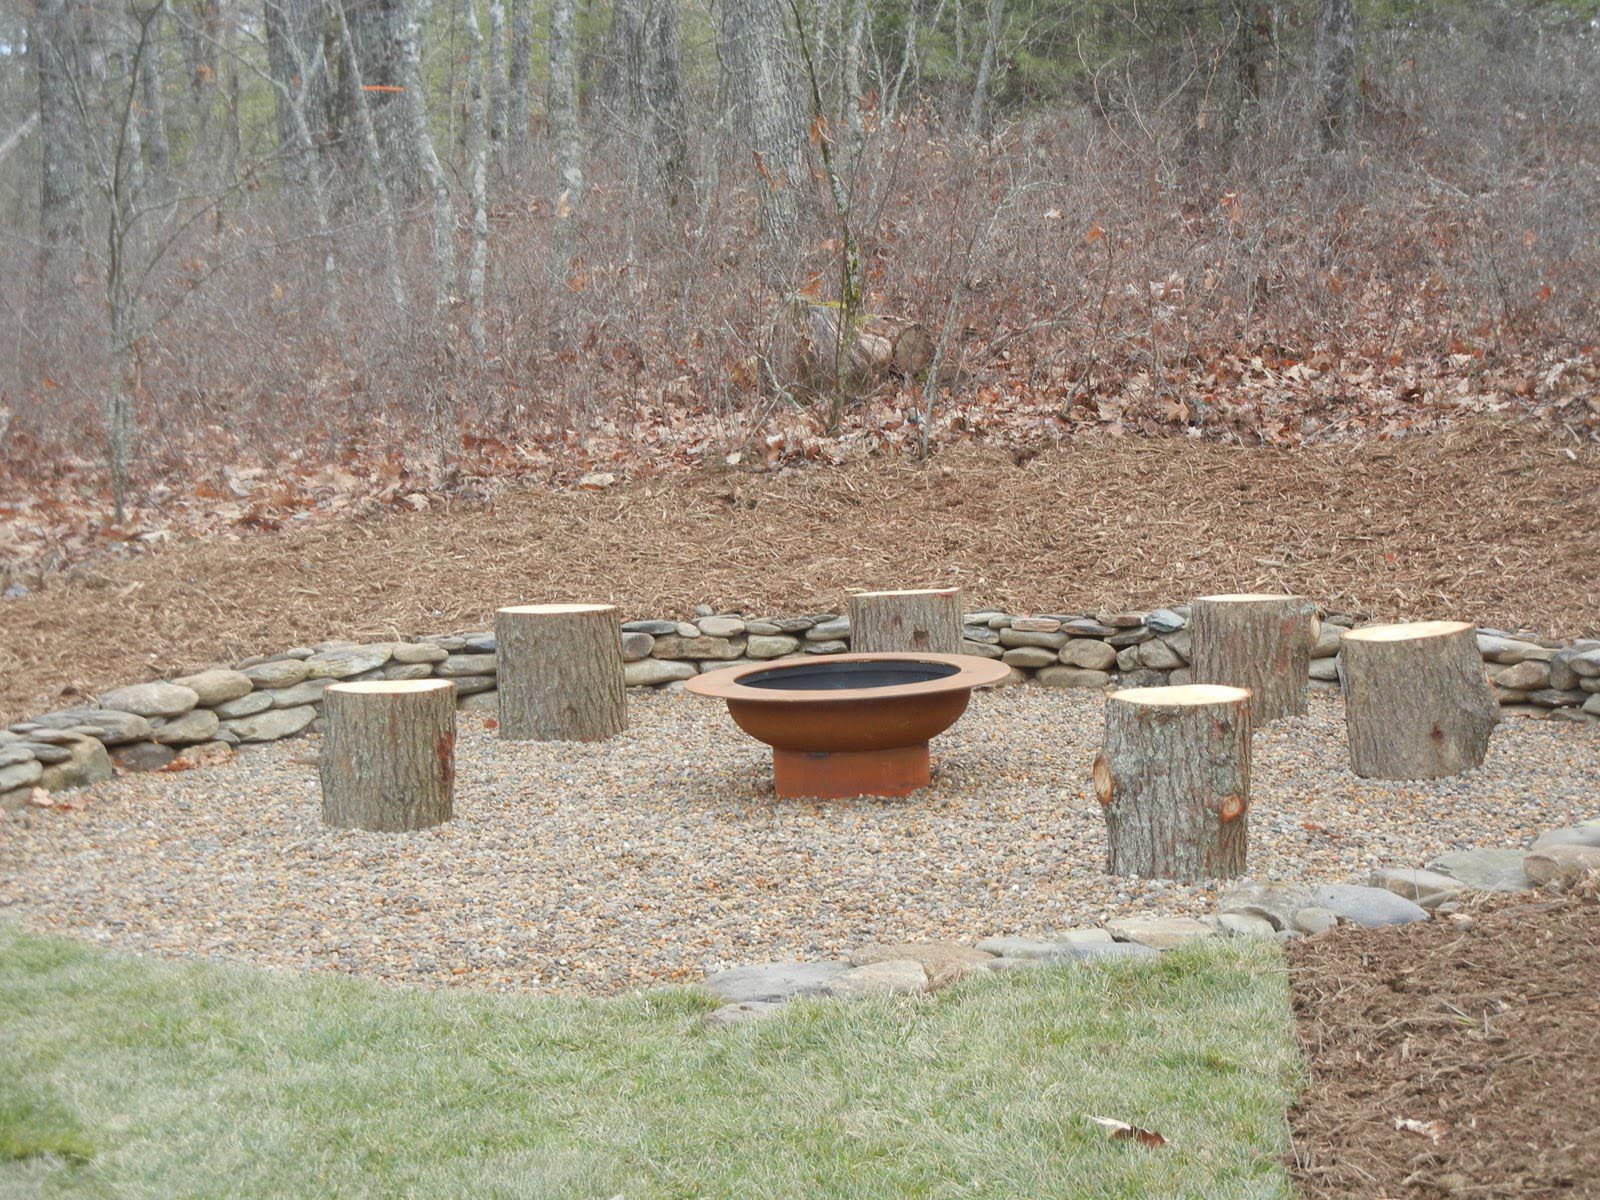 Used Tractor Rim for Fire Pit